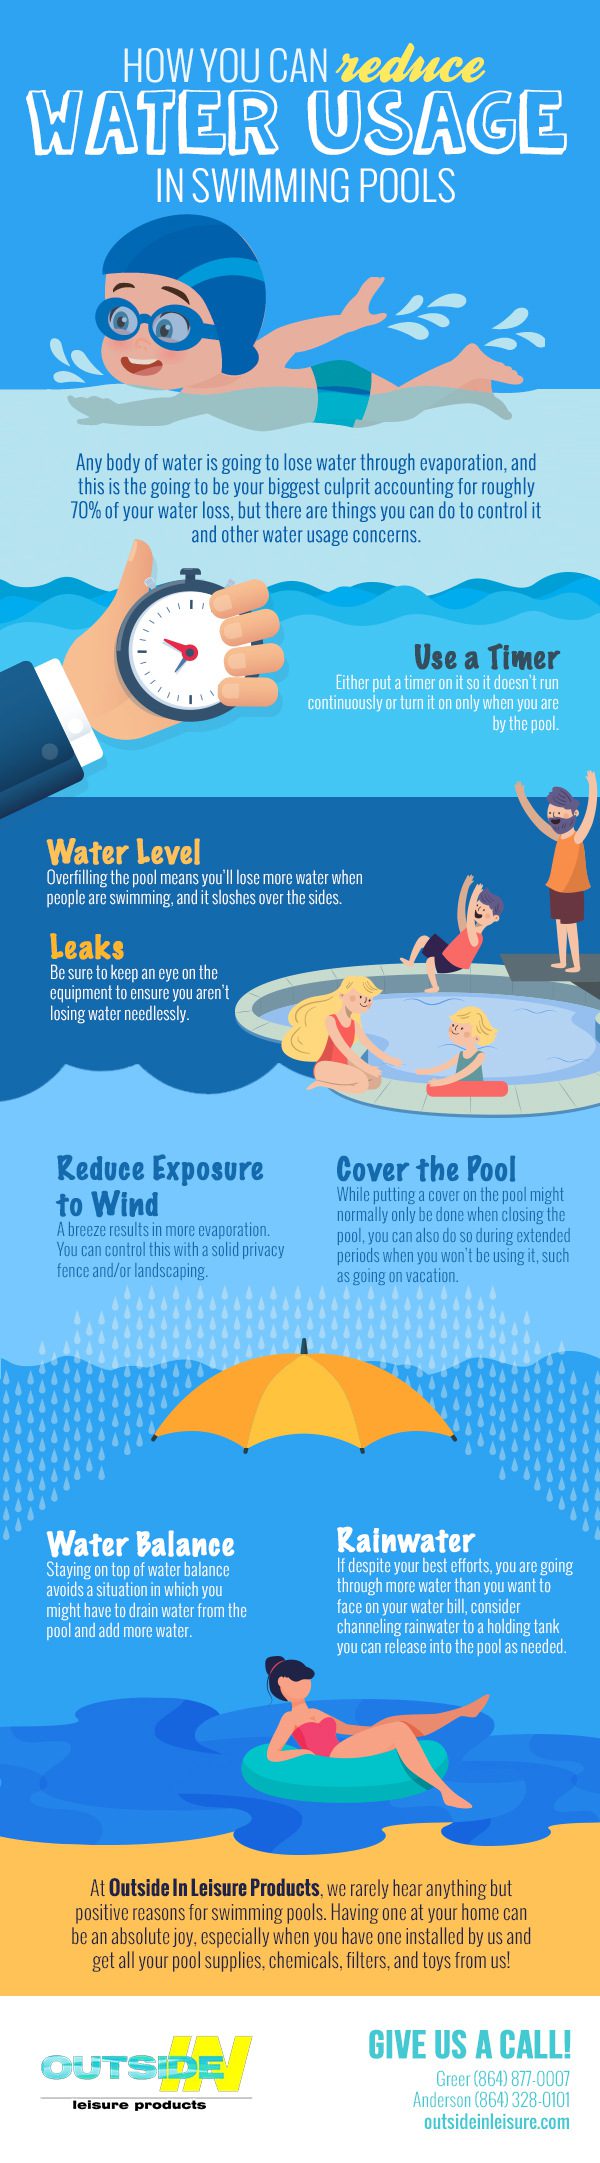 How You Can Reduce Water Usage in Swimming Pools [infographic]